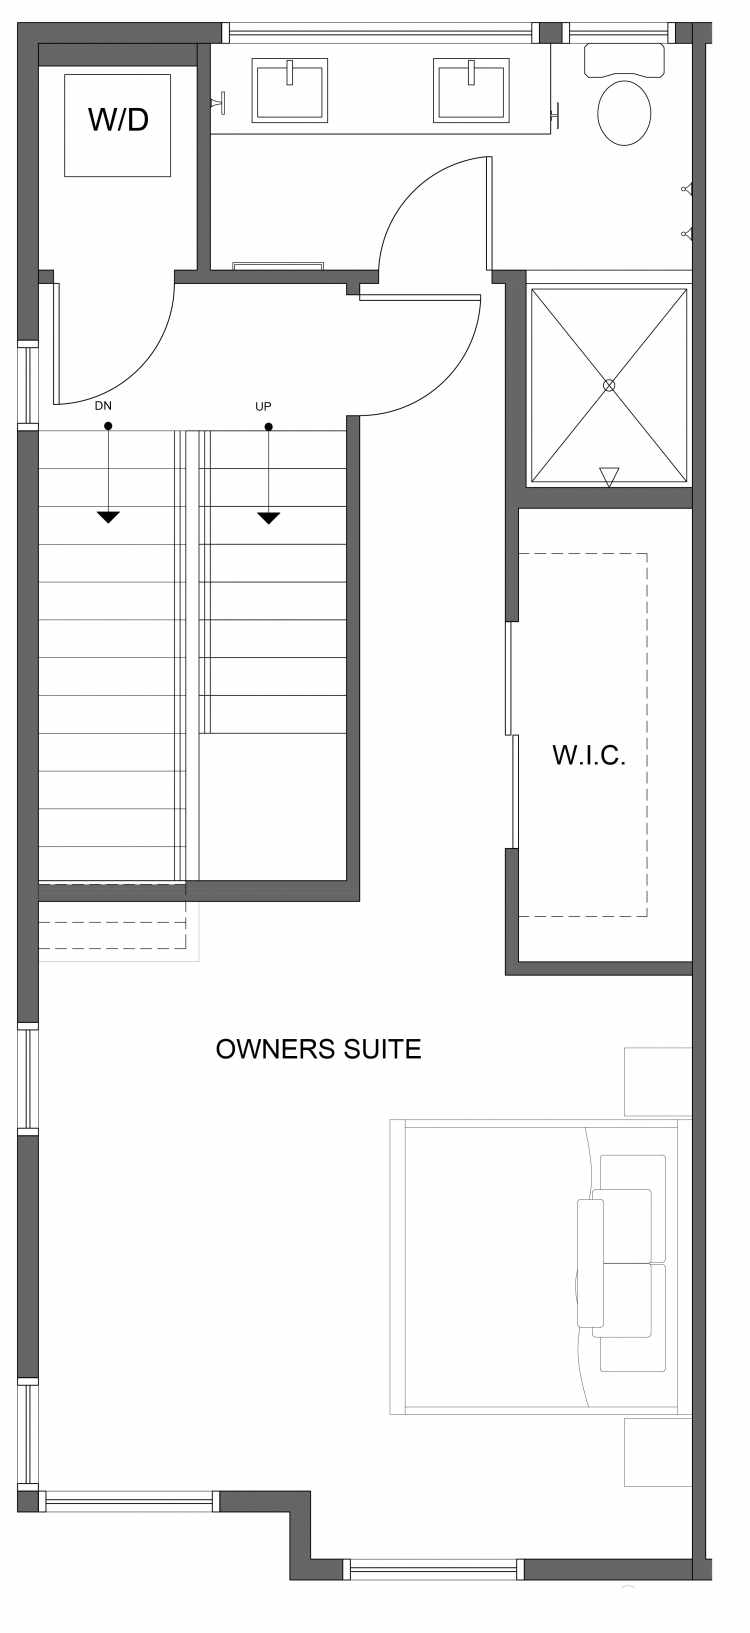 Third Floor Plan of 1030A NE 70th St, One of the Sopris on 70th Townhomes in Roosevelt